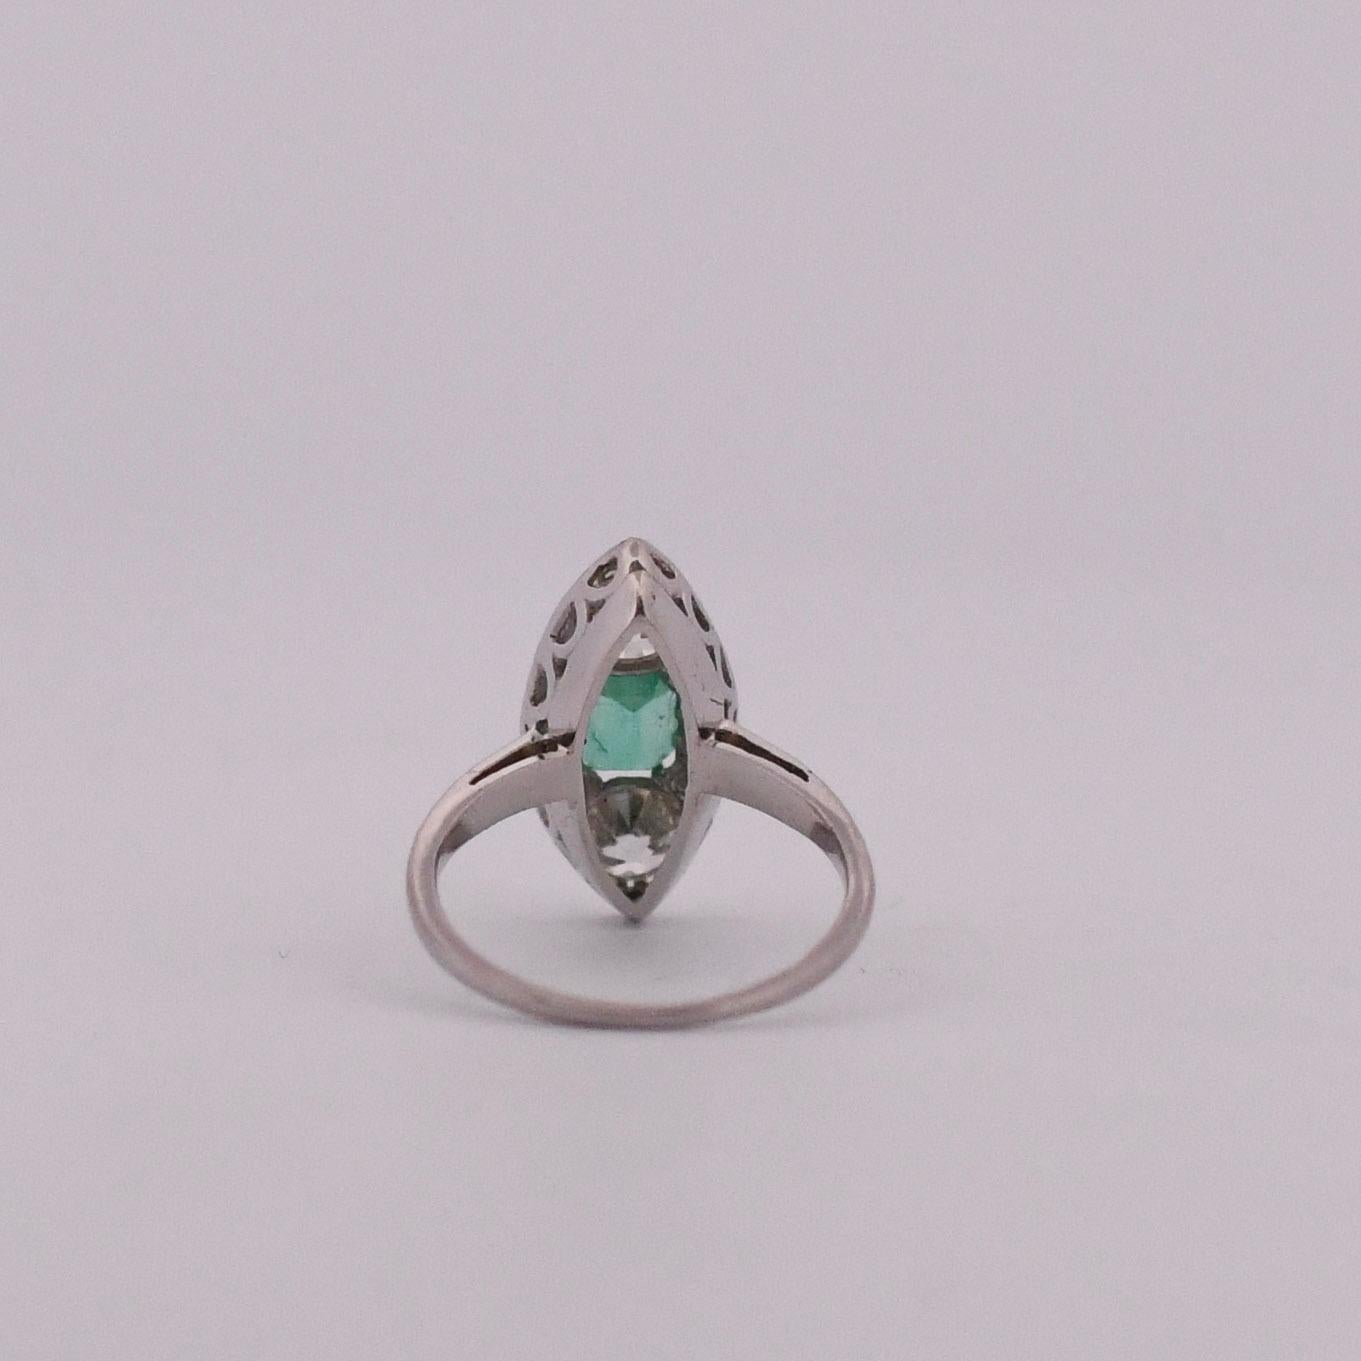 Circa 1920's Three Stone Navette Diamond and Colombian Emerald Ring In Good Condition For Sale In Addison, TX